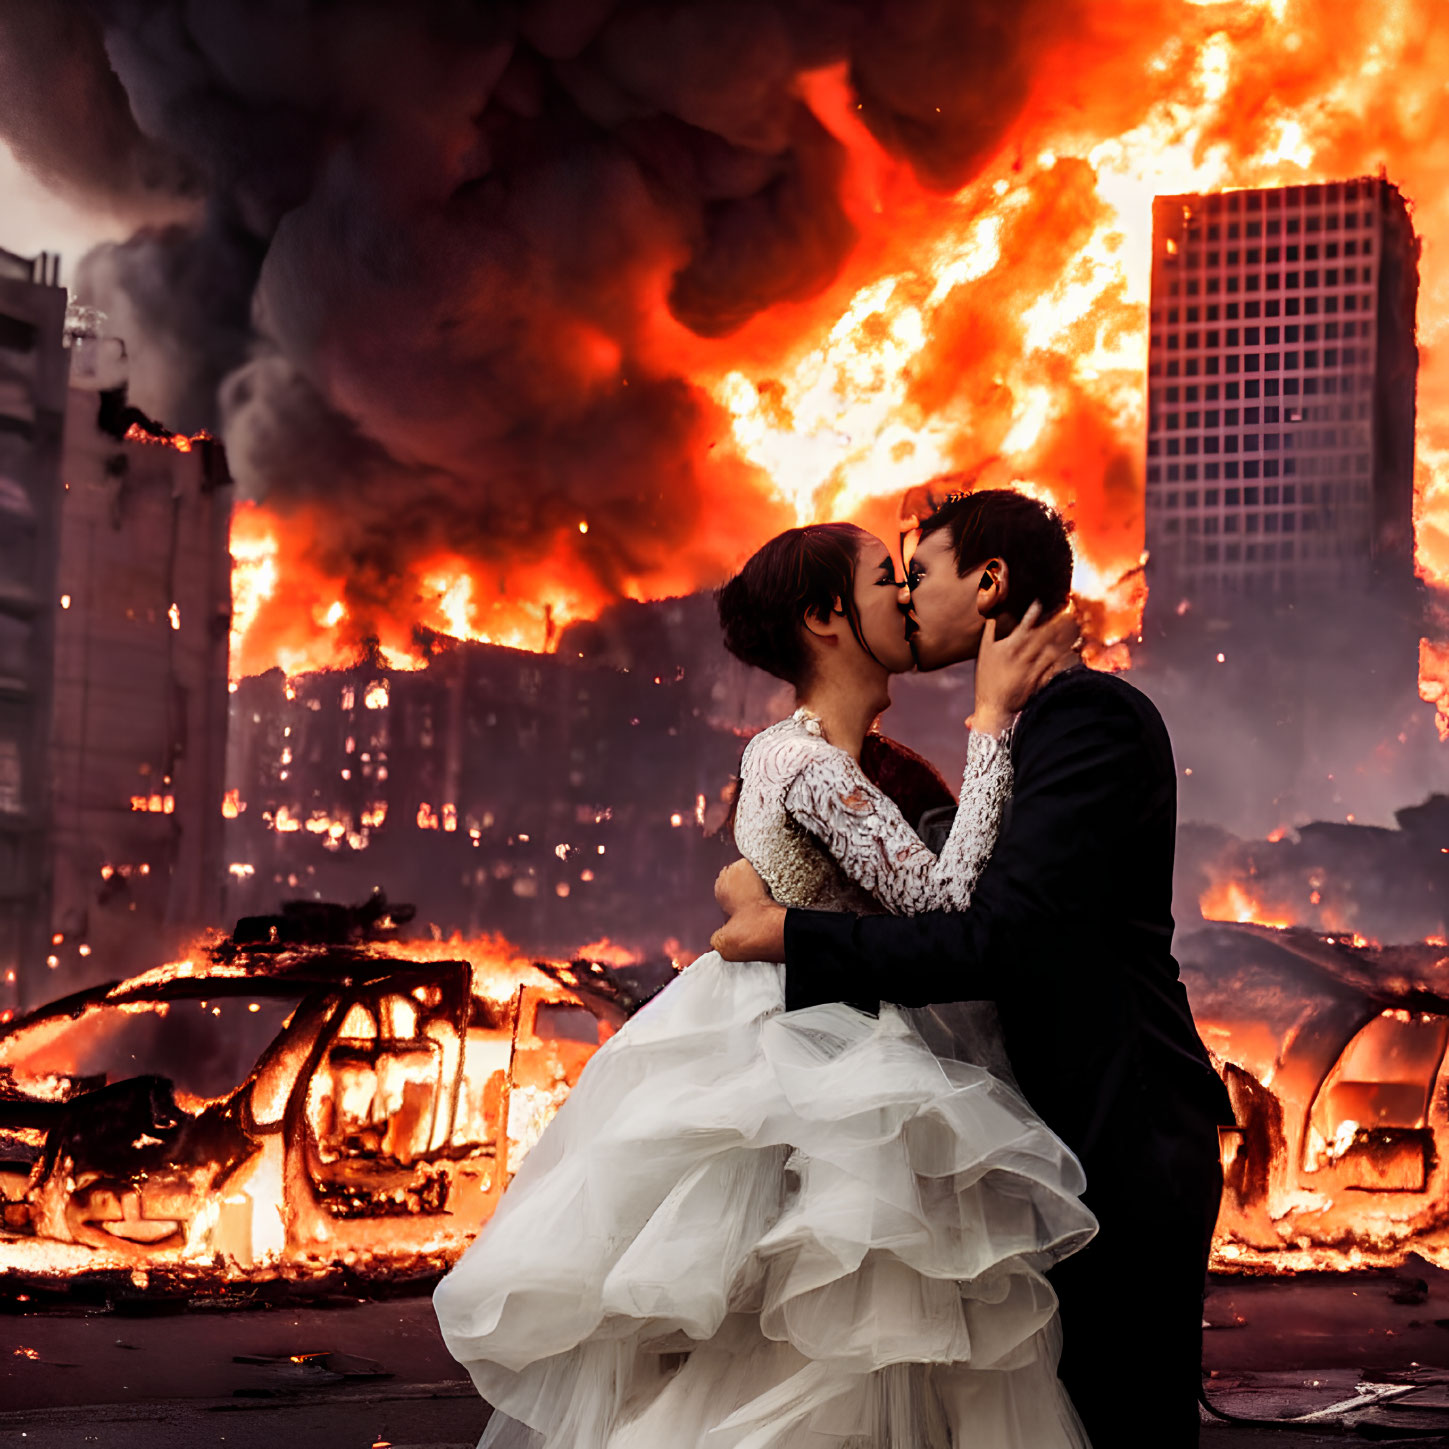 Passionate kiss amidst chaotic fires and destruction.